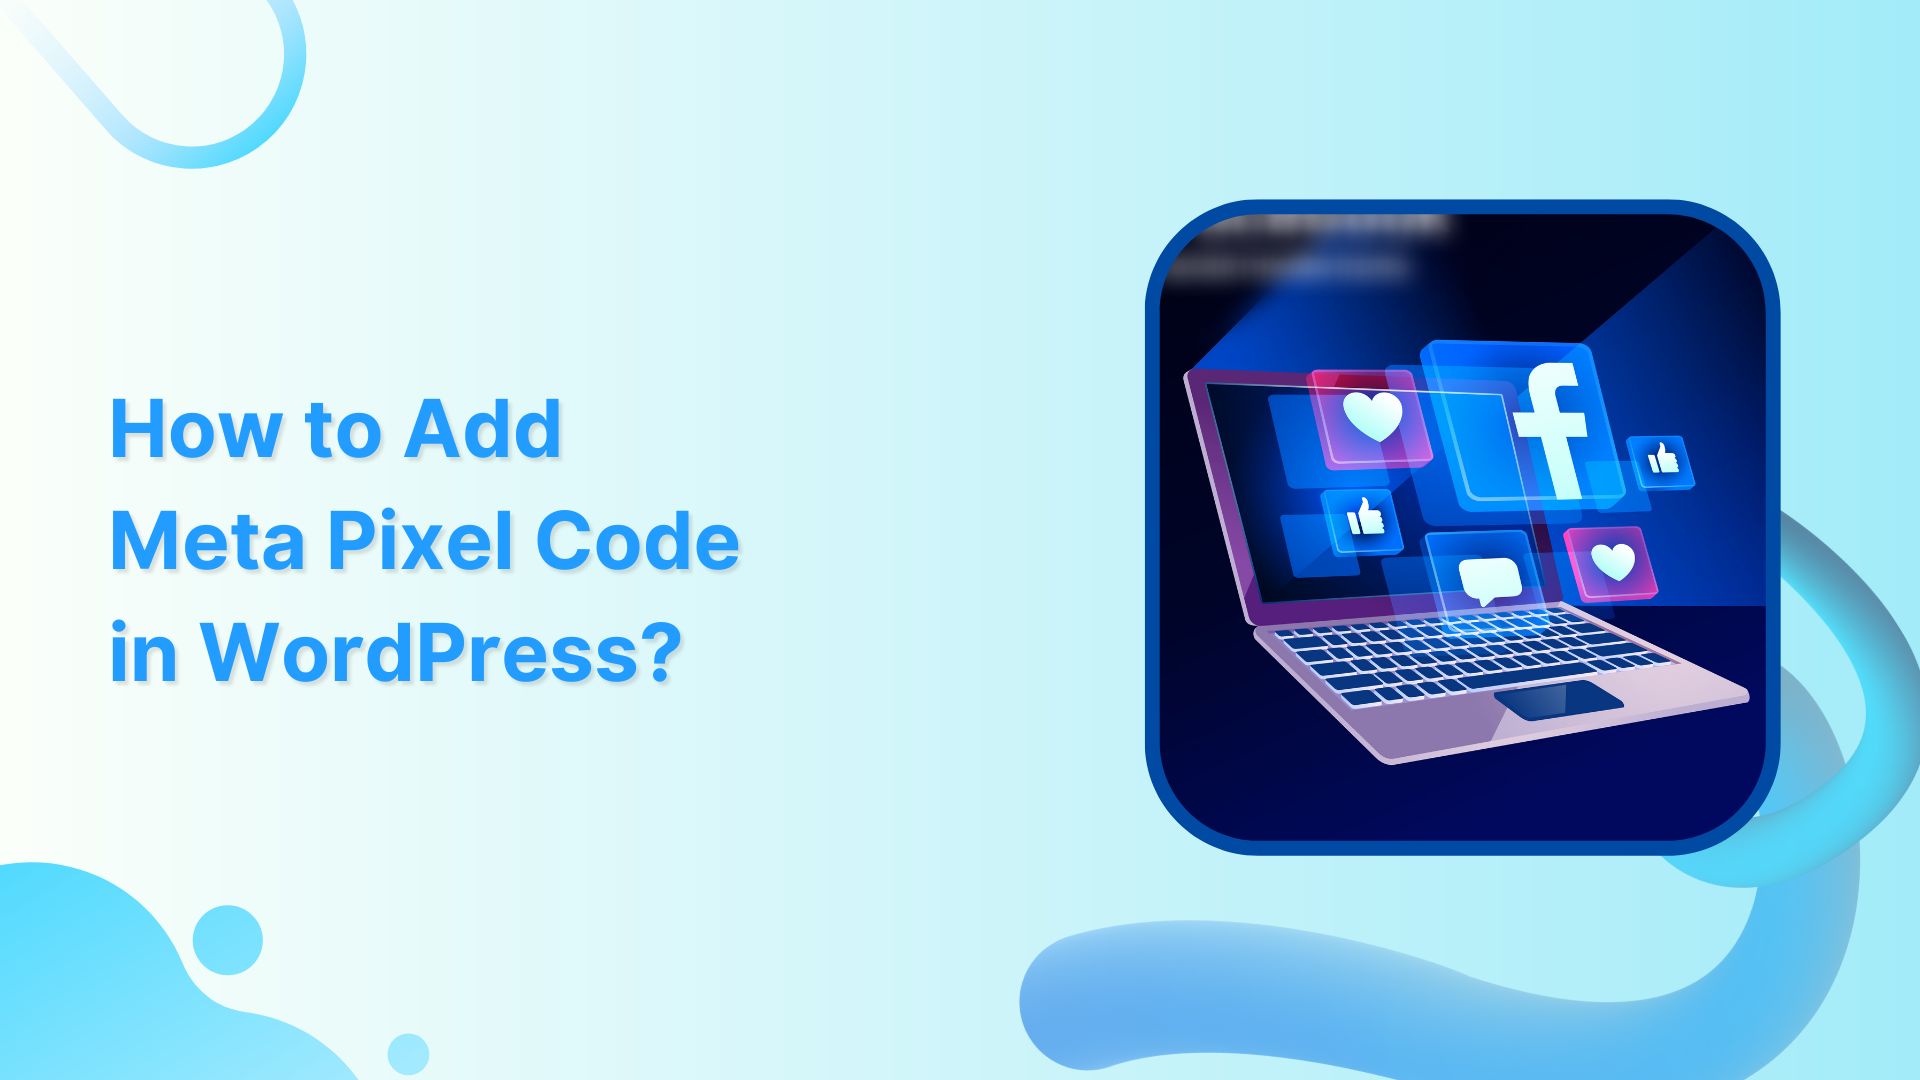 How to Add a Meta Pixel Code in WordPress: Step-by-Step Guide